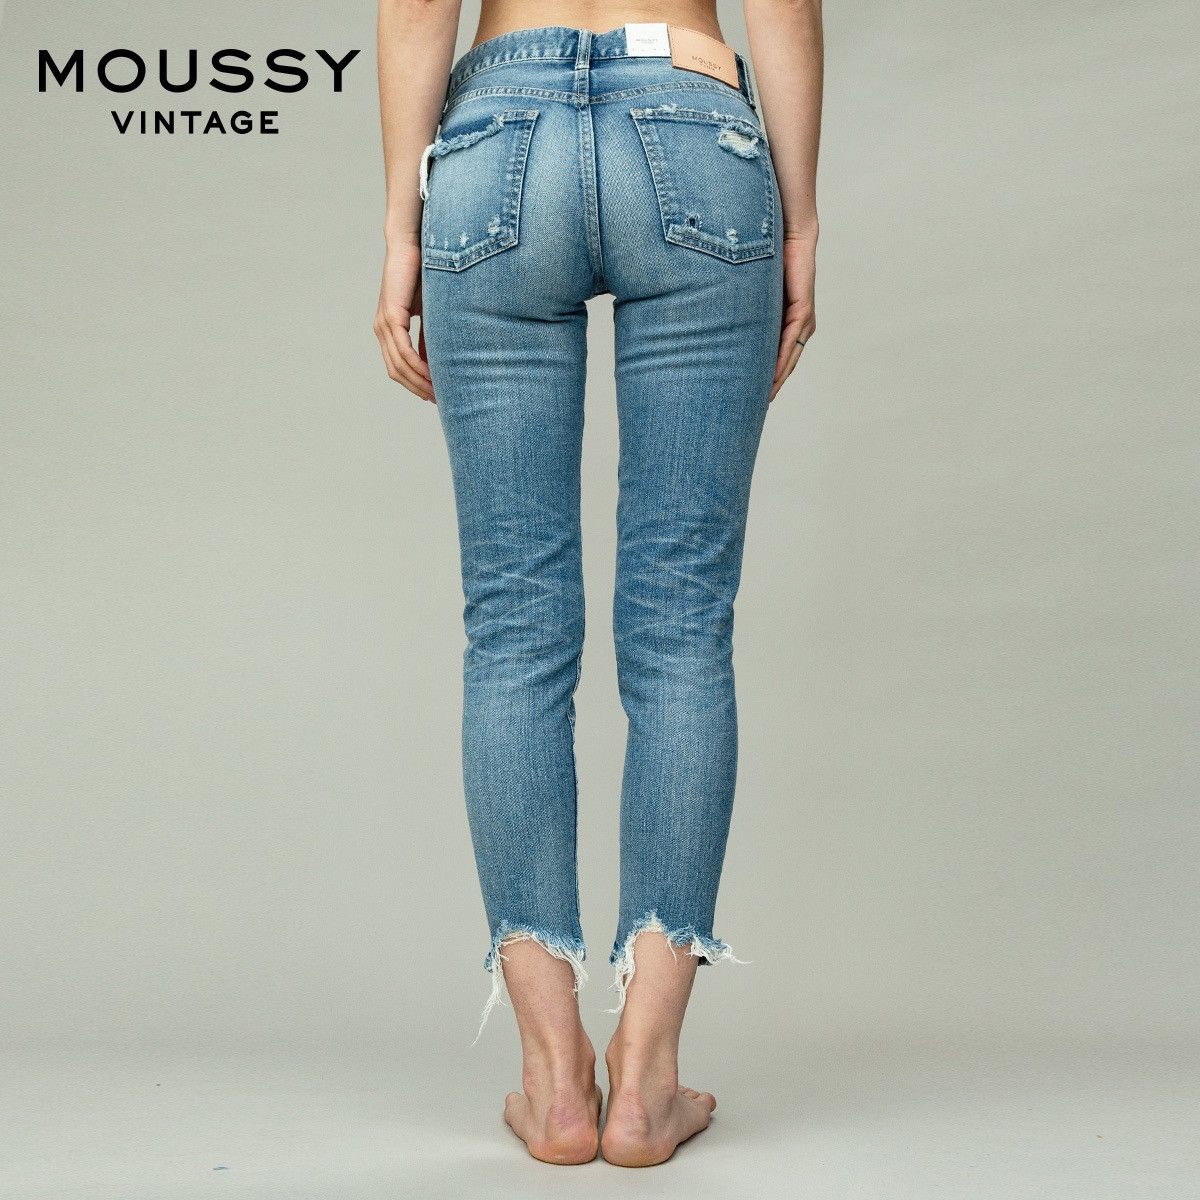 Japanese Brand Moussy Vintage Distressed Blue Jeans Size 27" / US 4 / IT 40 - 3 Thumbnail